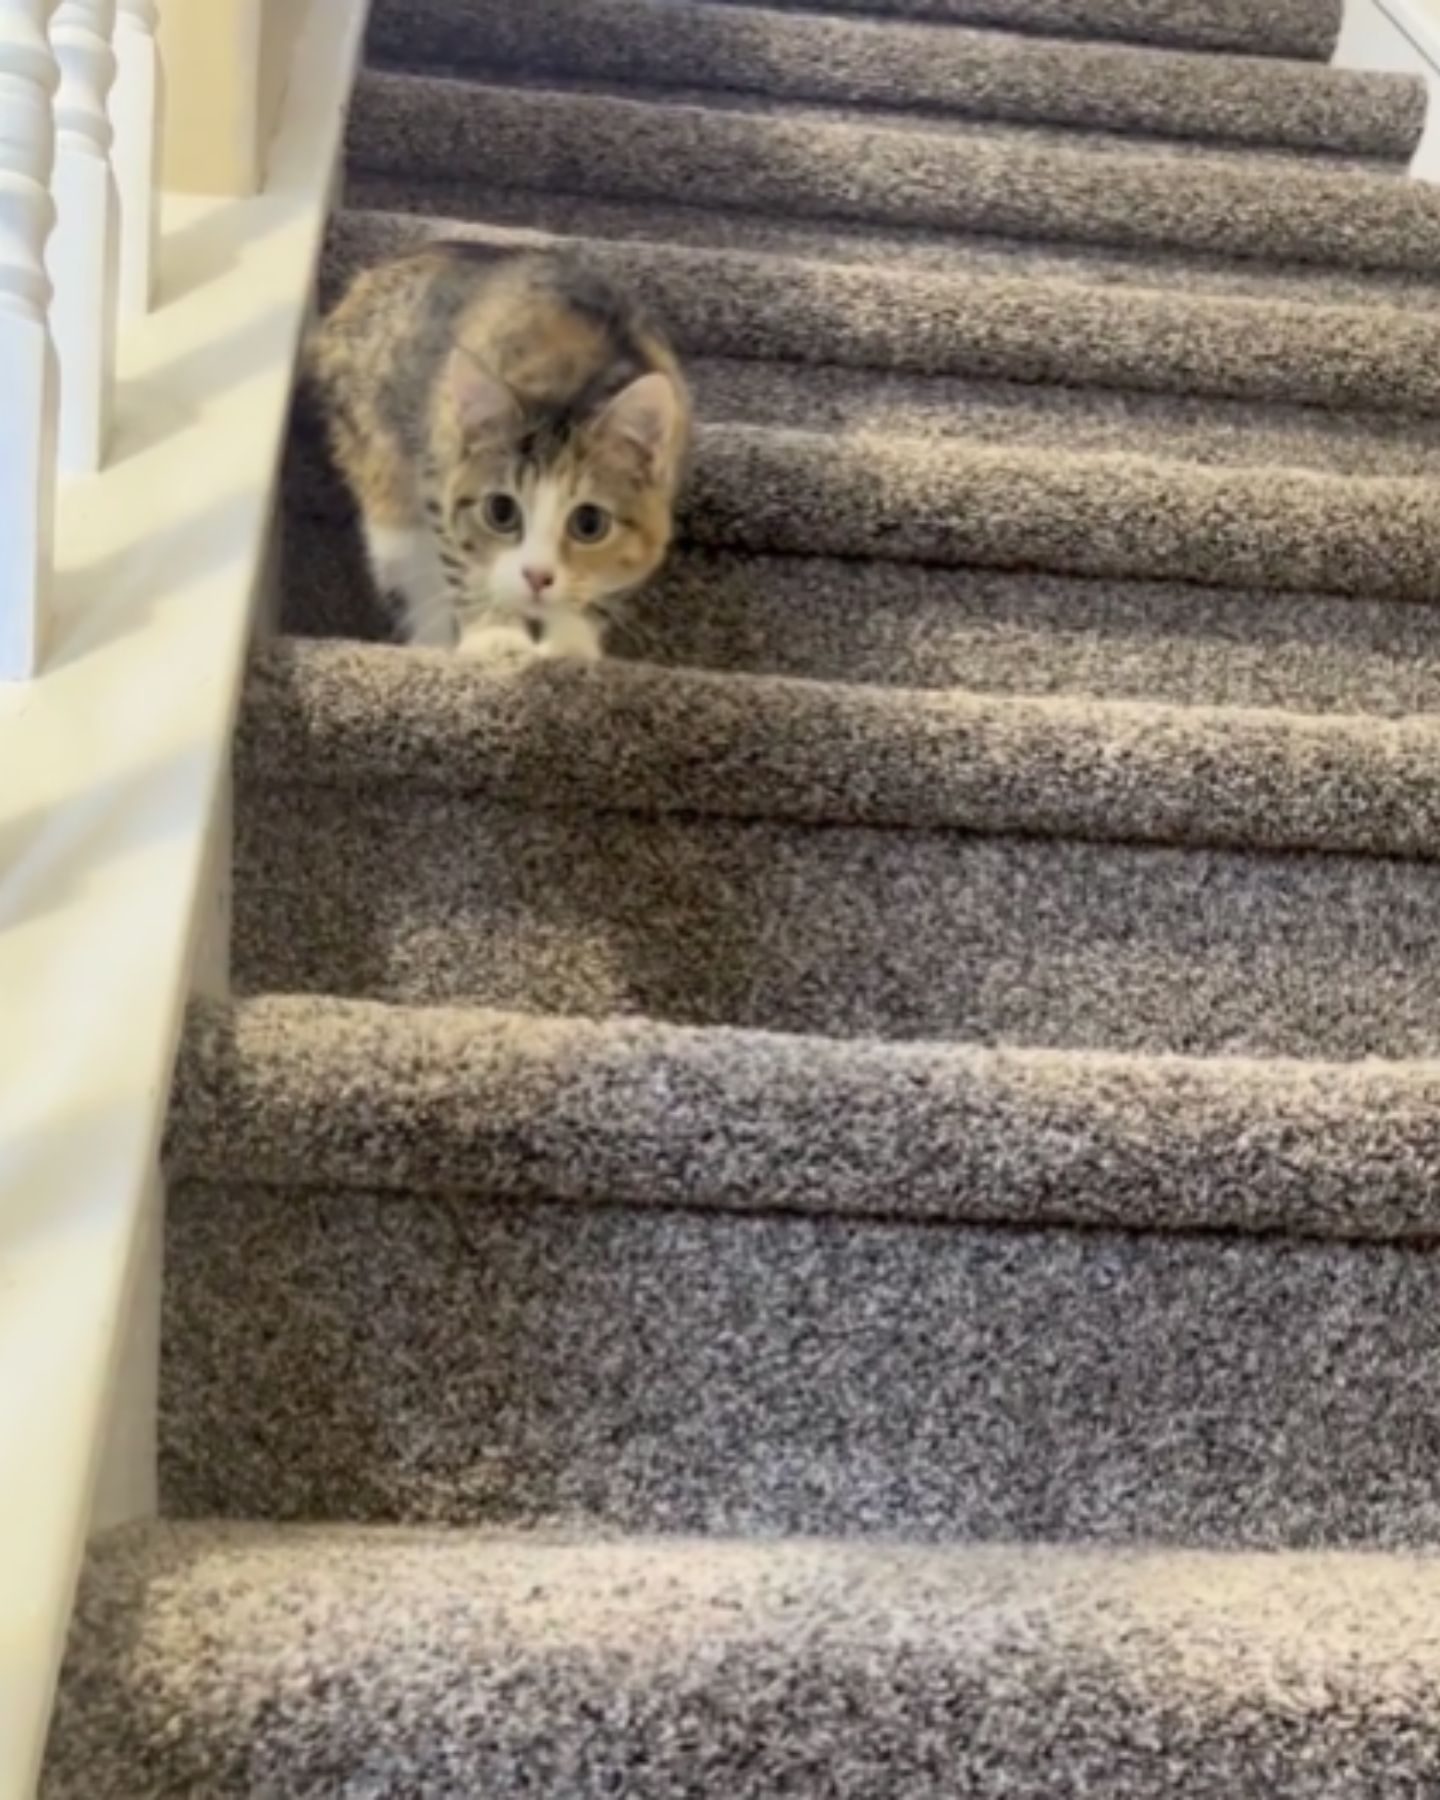 disabled kitten on a stairs